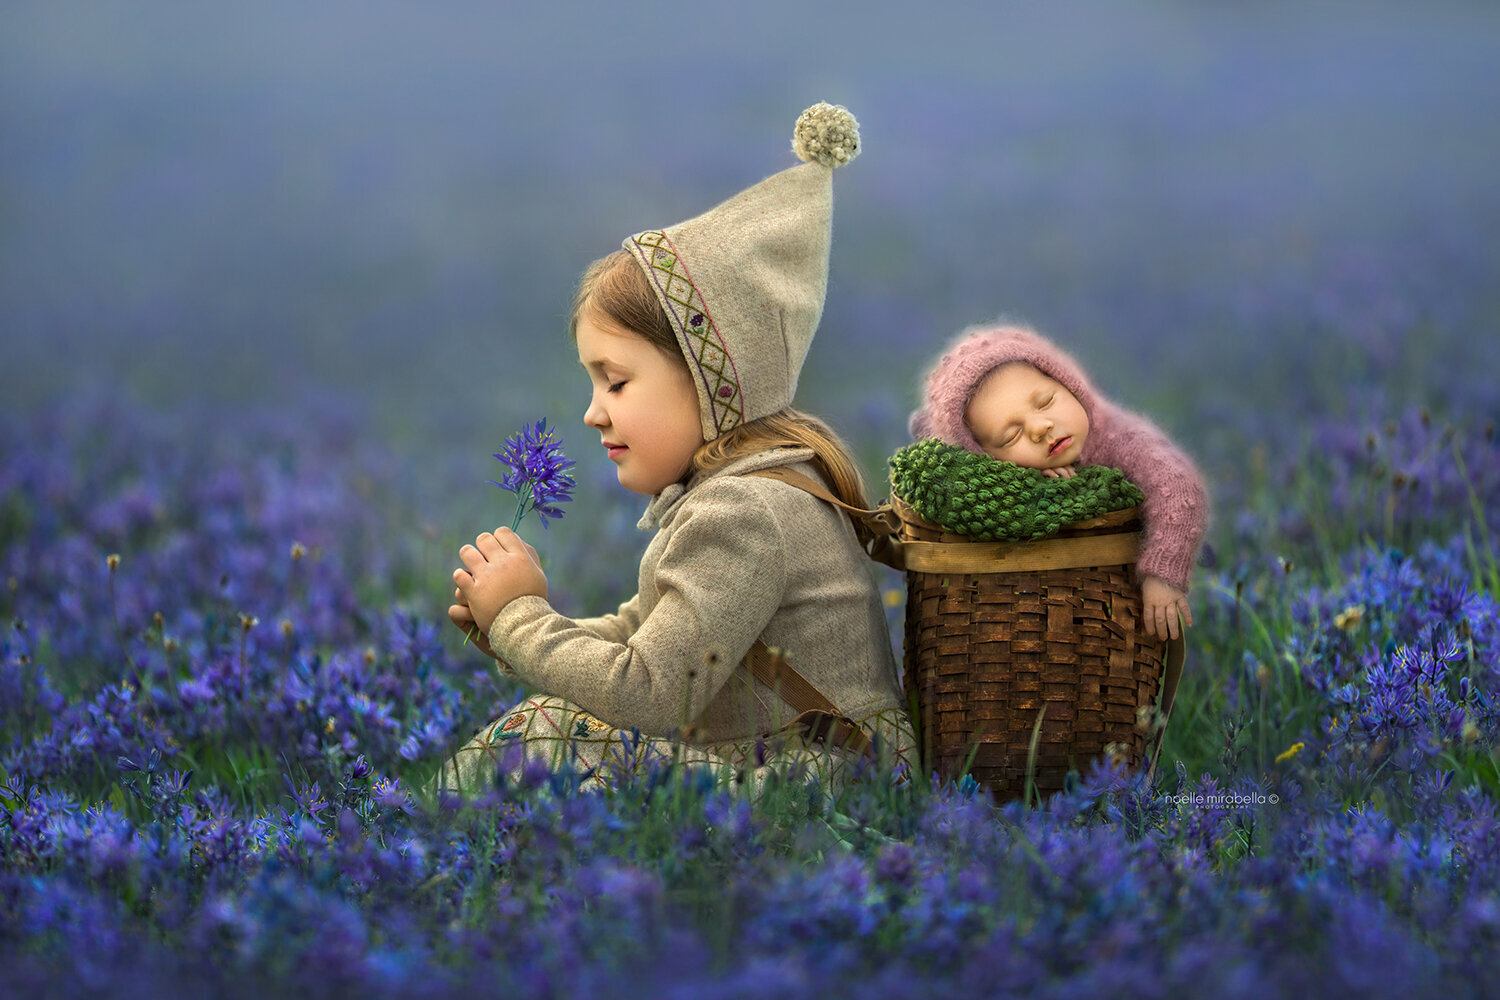 Child and newborn in blue camas flowers.